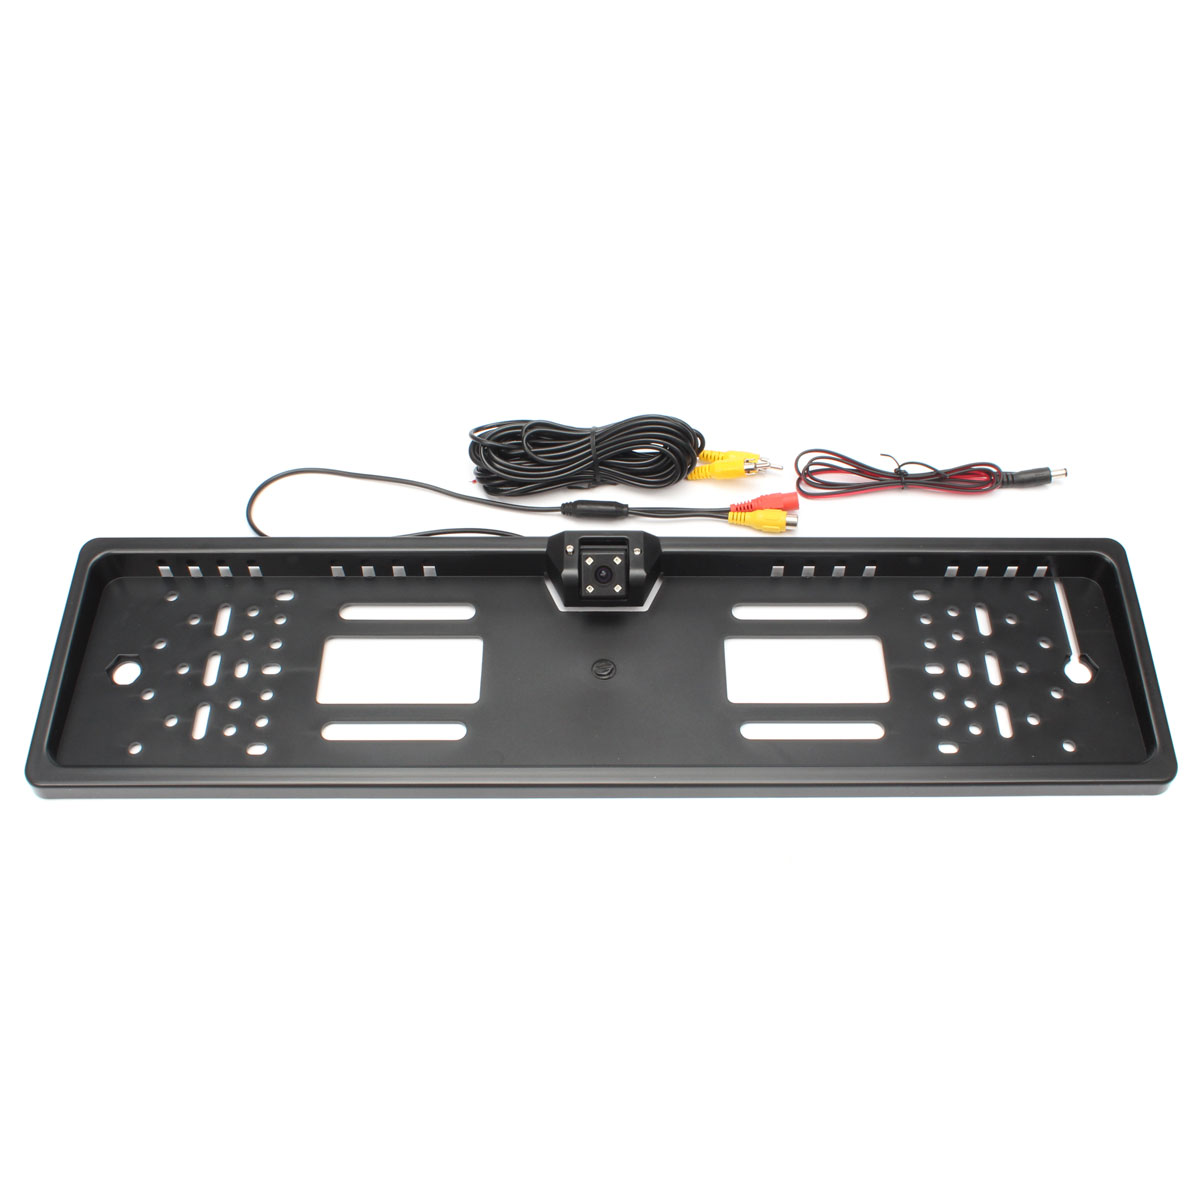 Reversing-HD-Car-Rear-View-Camera-Parking-Plate-Night-Vision-With-LED-White-Light-1380860